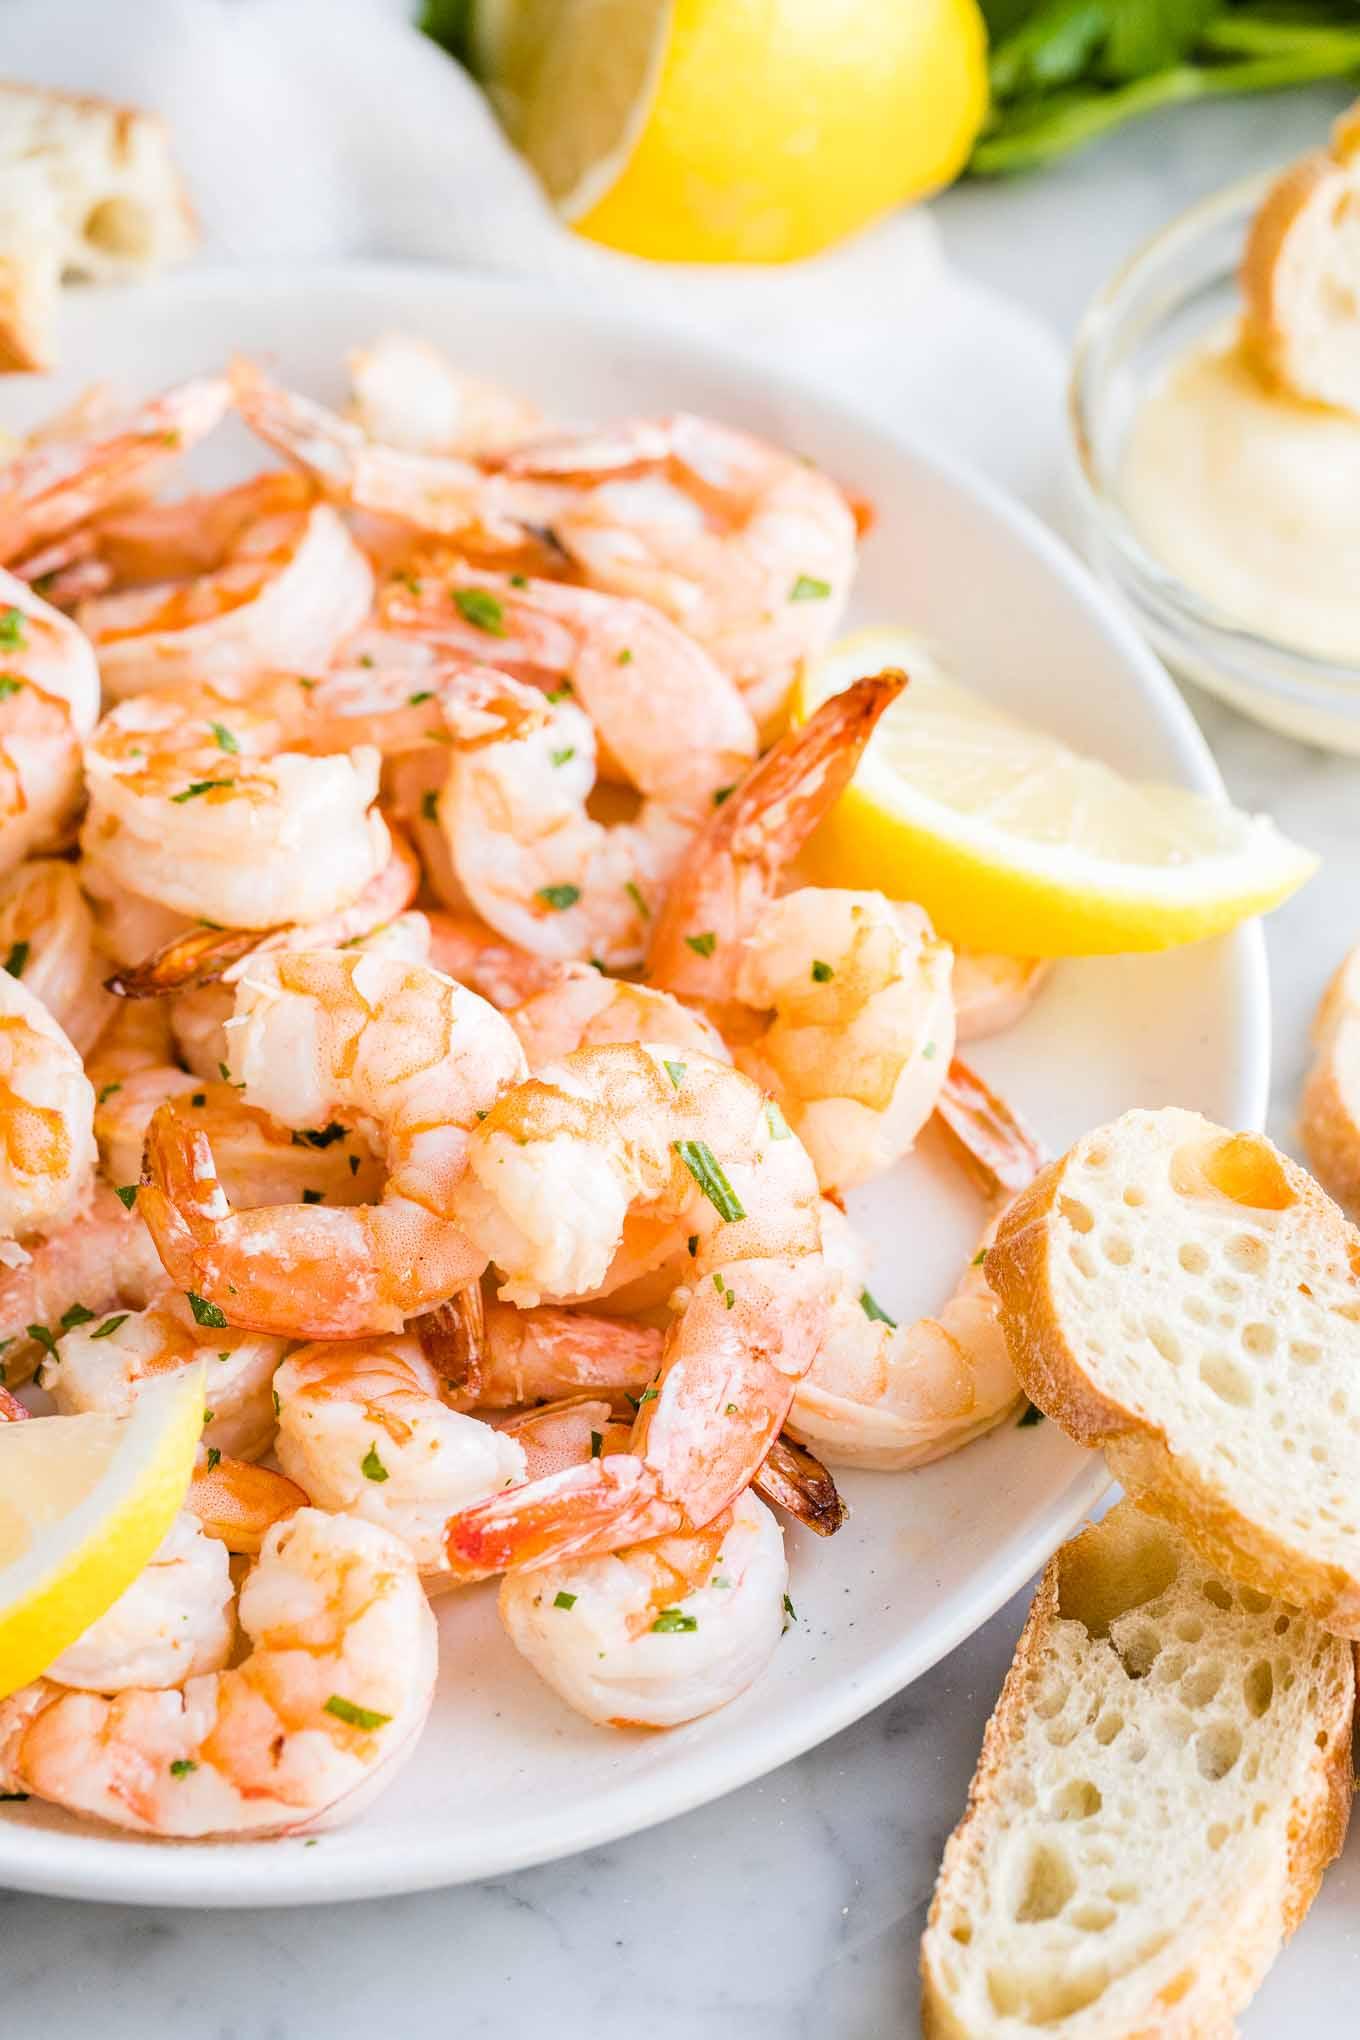 Air Fryer Shrimp on a plate with bread on the side garnished with Lemon slices.